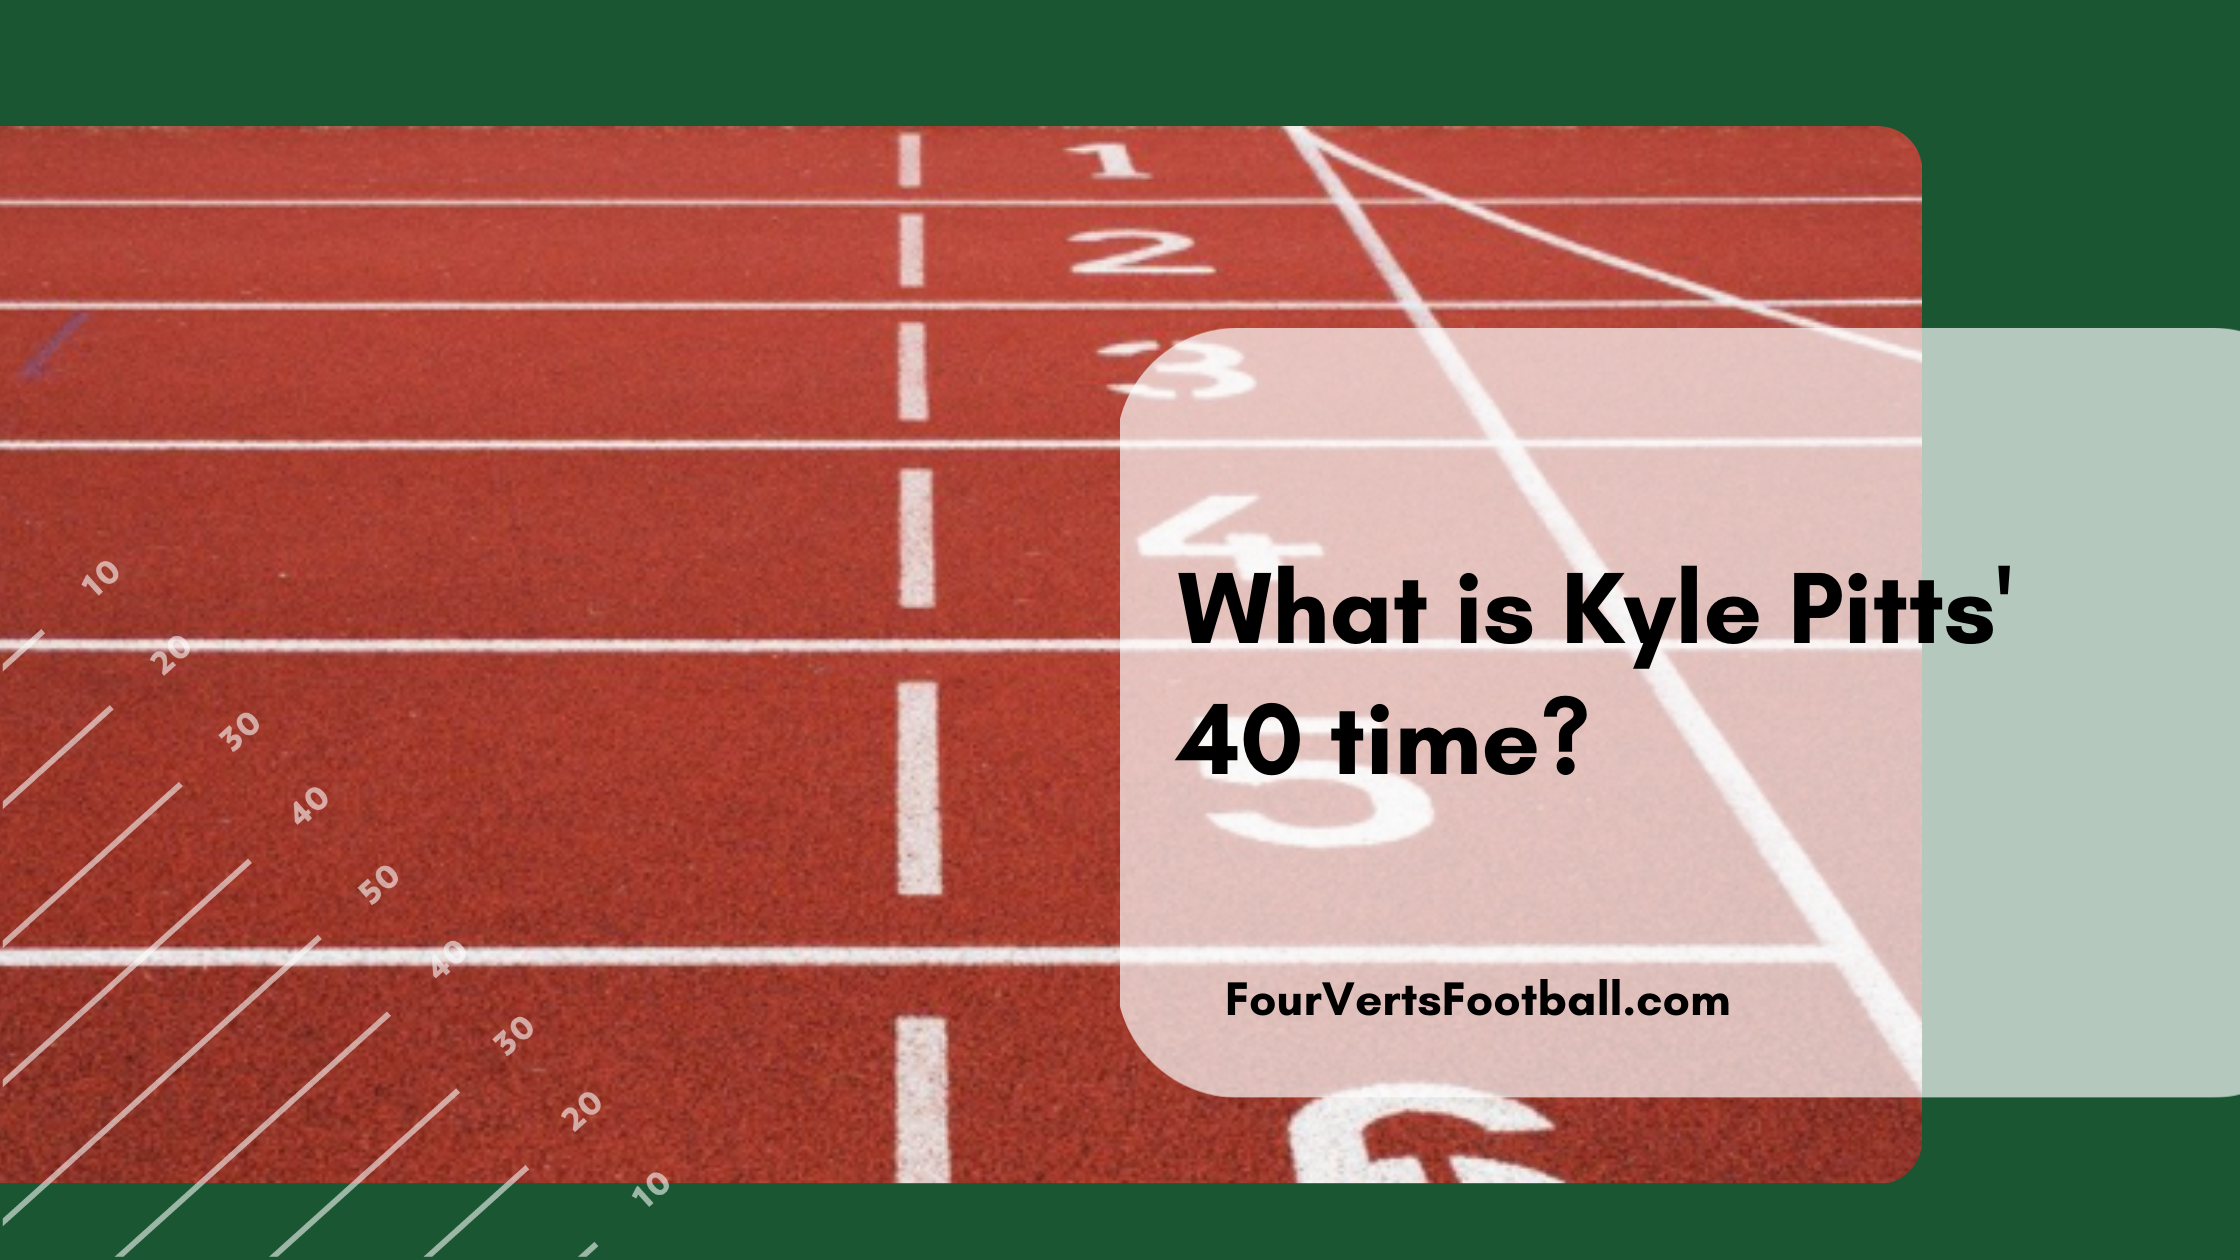 Kyle Pitts 40 time